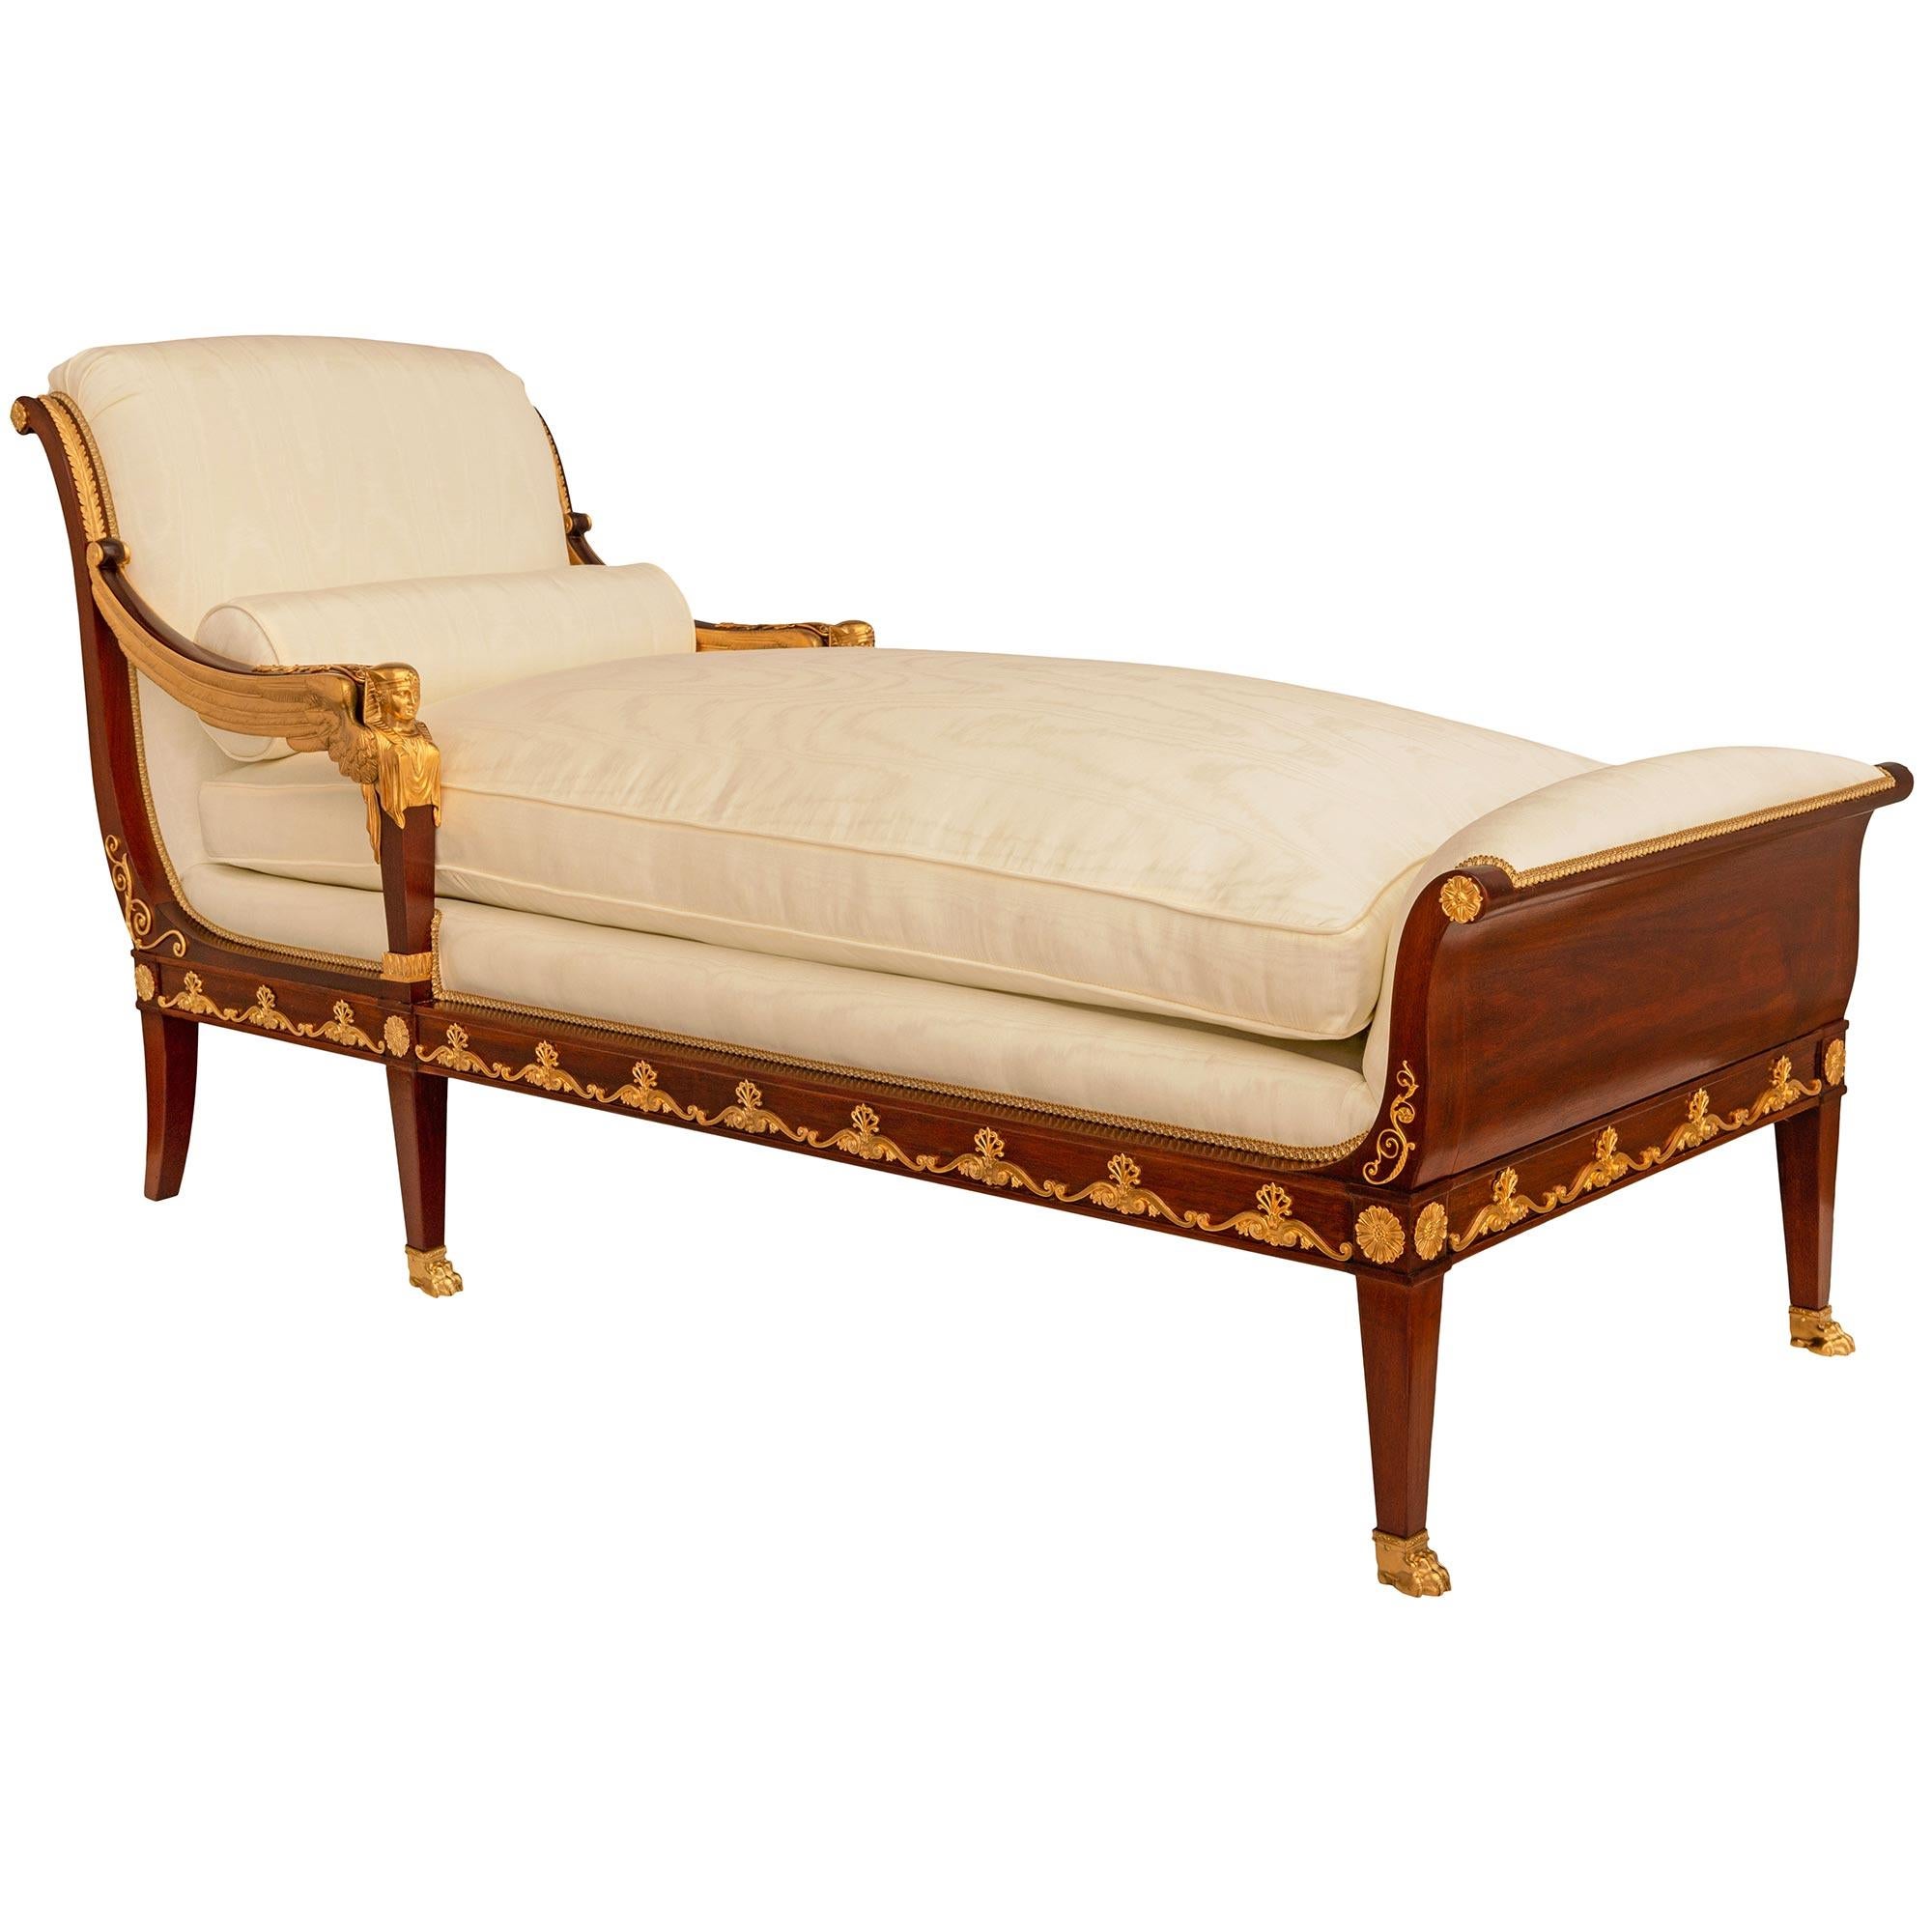 French early 19th century Empire period Mahogany and Ormolu chaise, Circa 1805 In Good Condition For Sale In West Palm Beach, FL